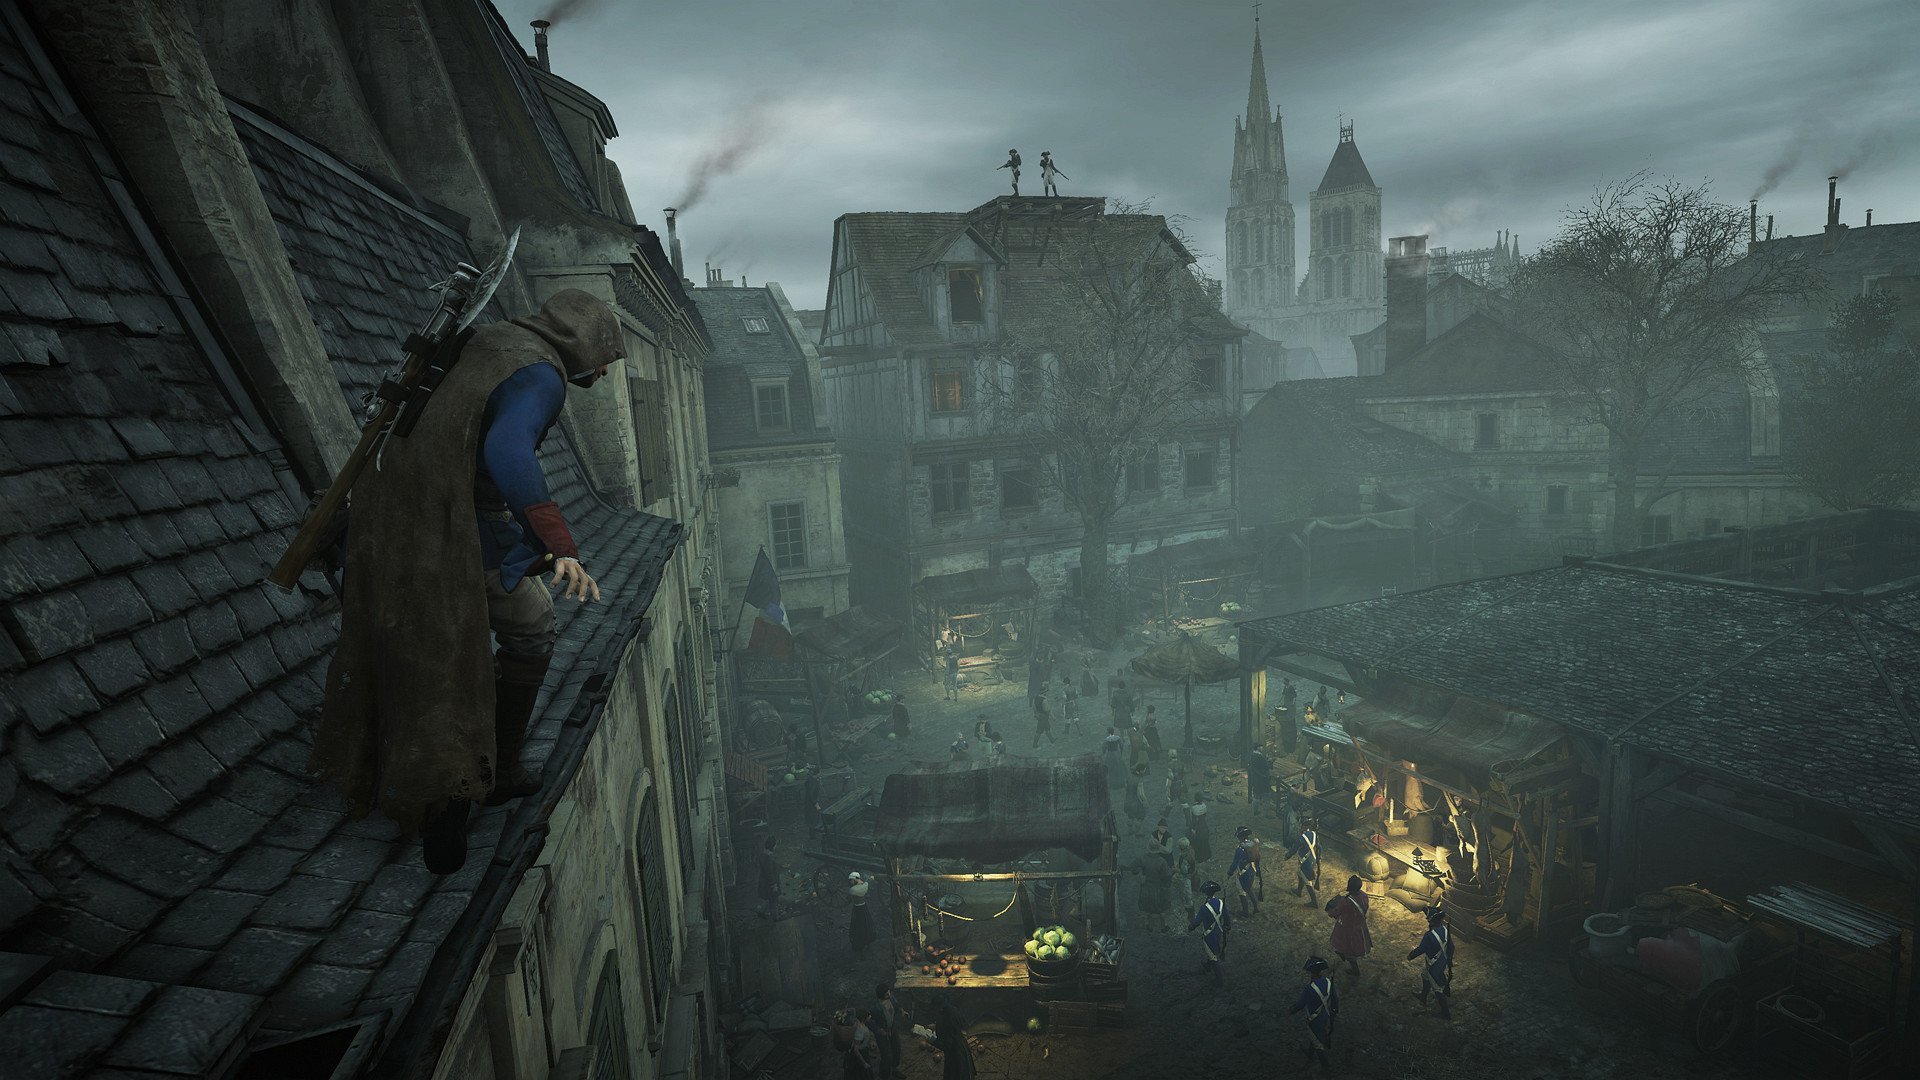 Best Assassin's Creed: Unity wallpaper ID:229506 for High Resolution hd 1080p computer